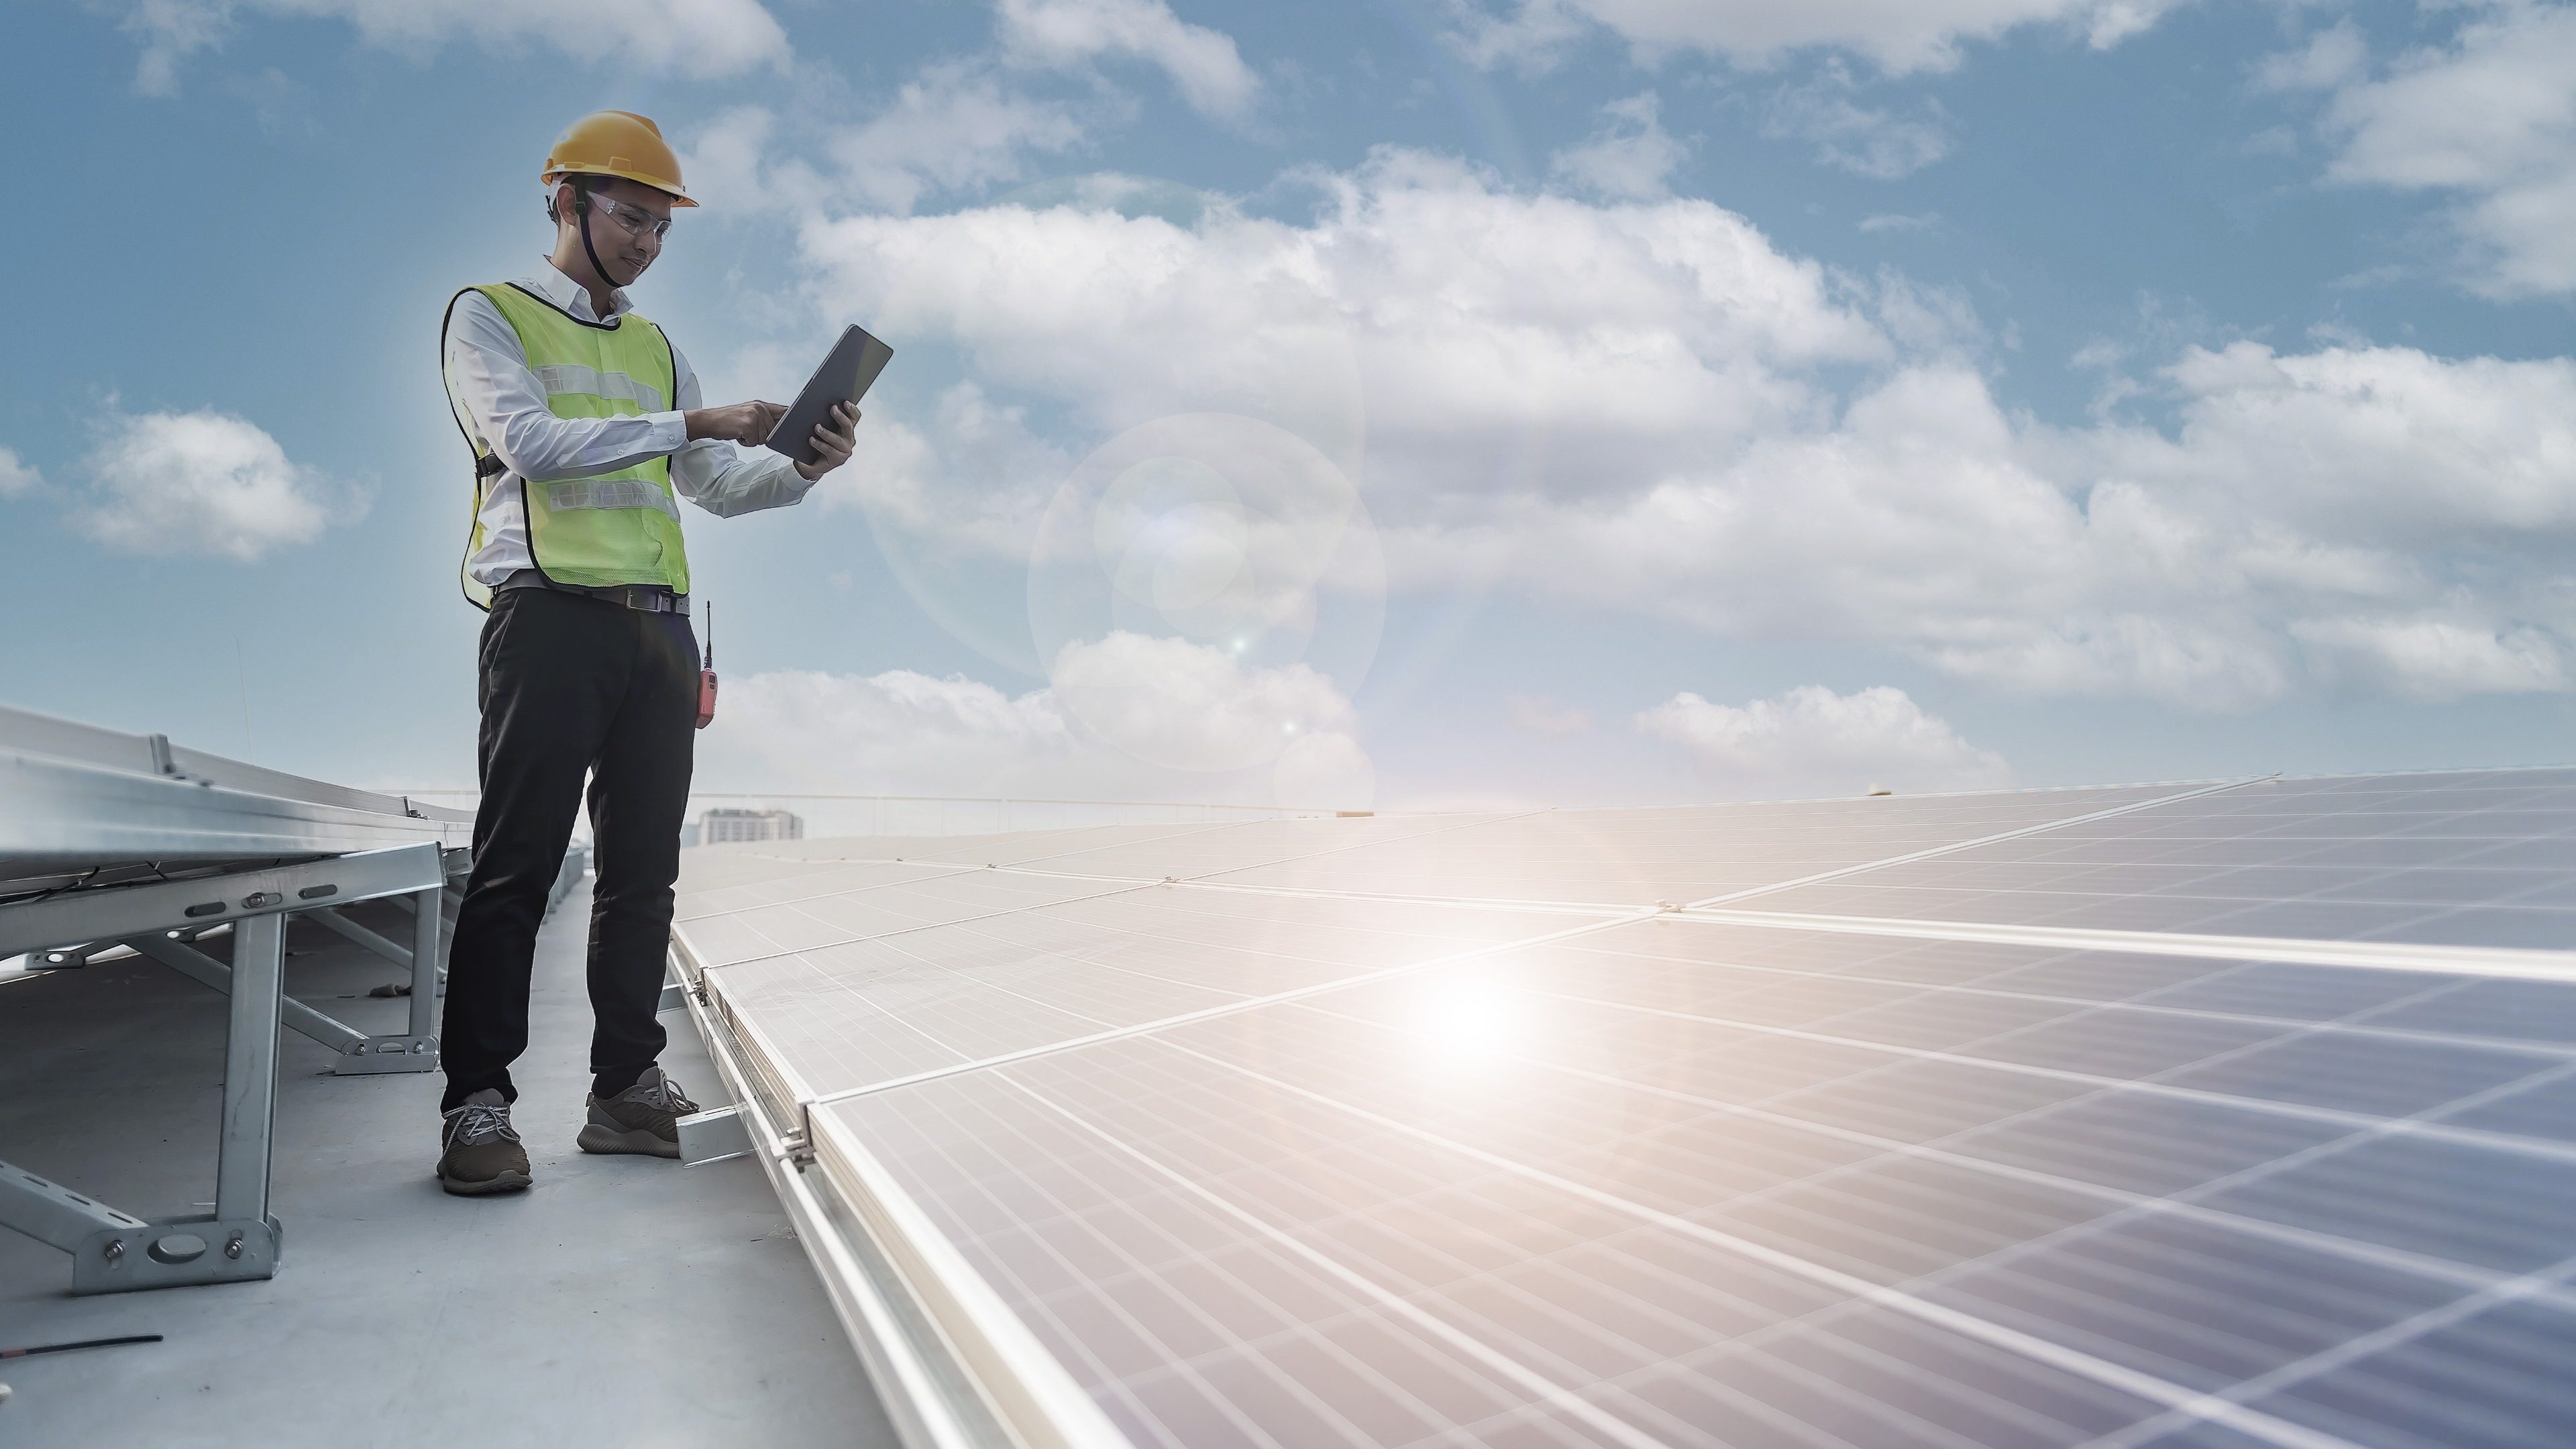 Engineer holding notebook sets the operation of the solar panel on the roof of the building to work at full efficiency.Using solar cells is energy saving. Renewable energy concepts.